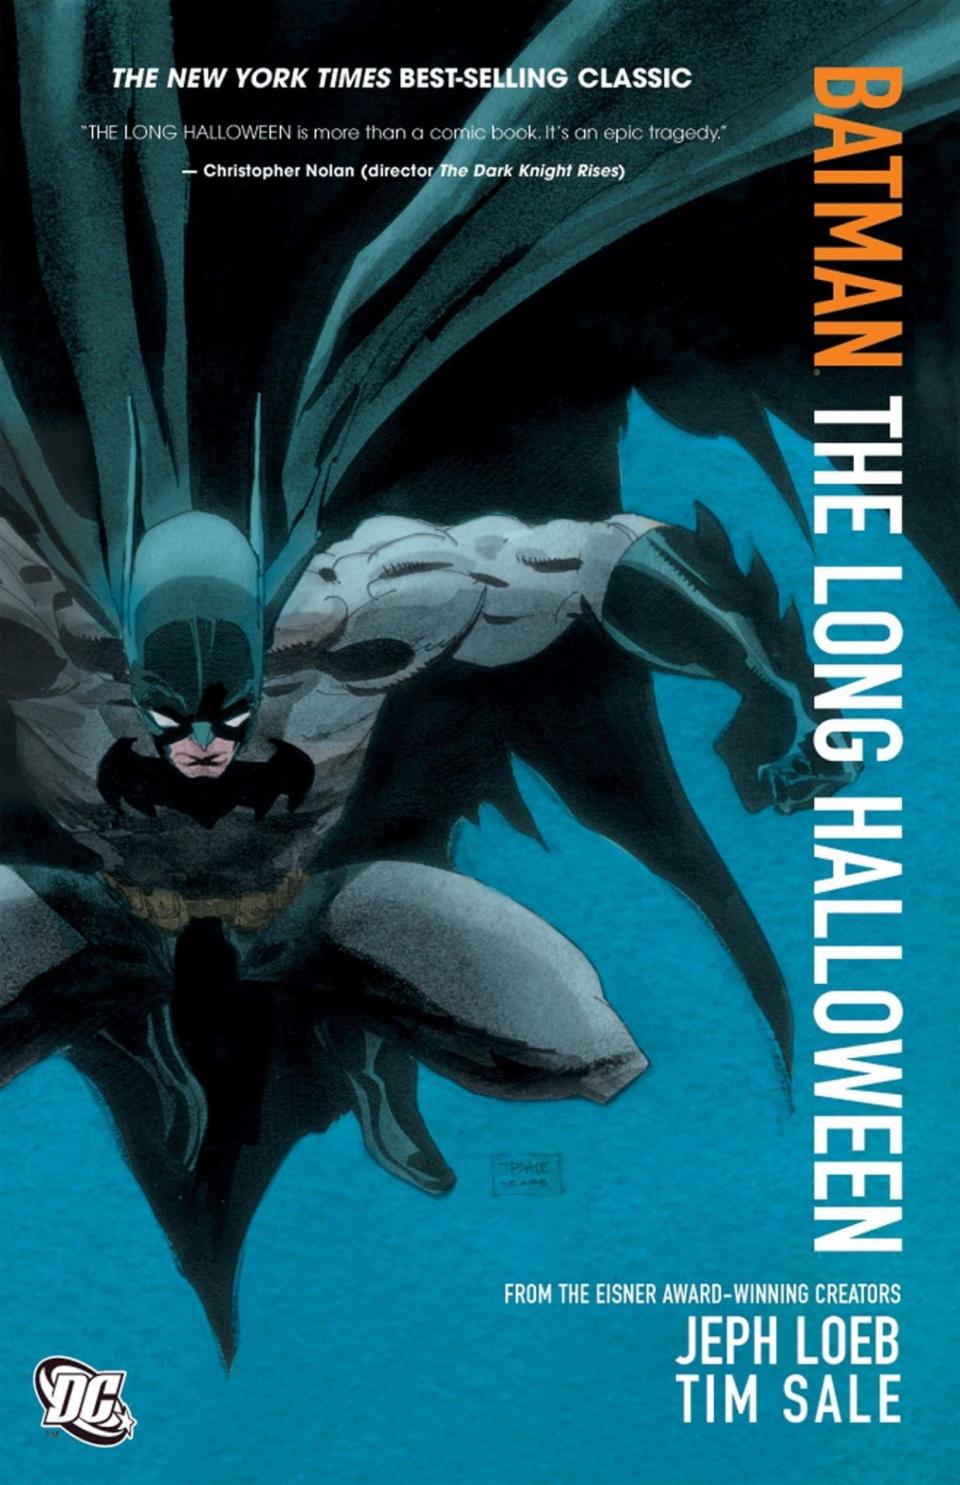 Batman on the cover of The Long Halloween comic